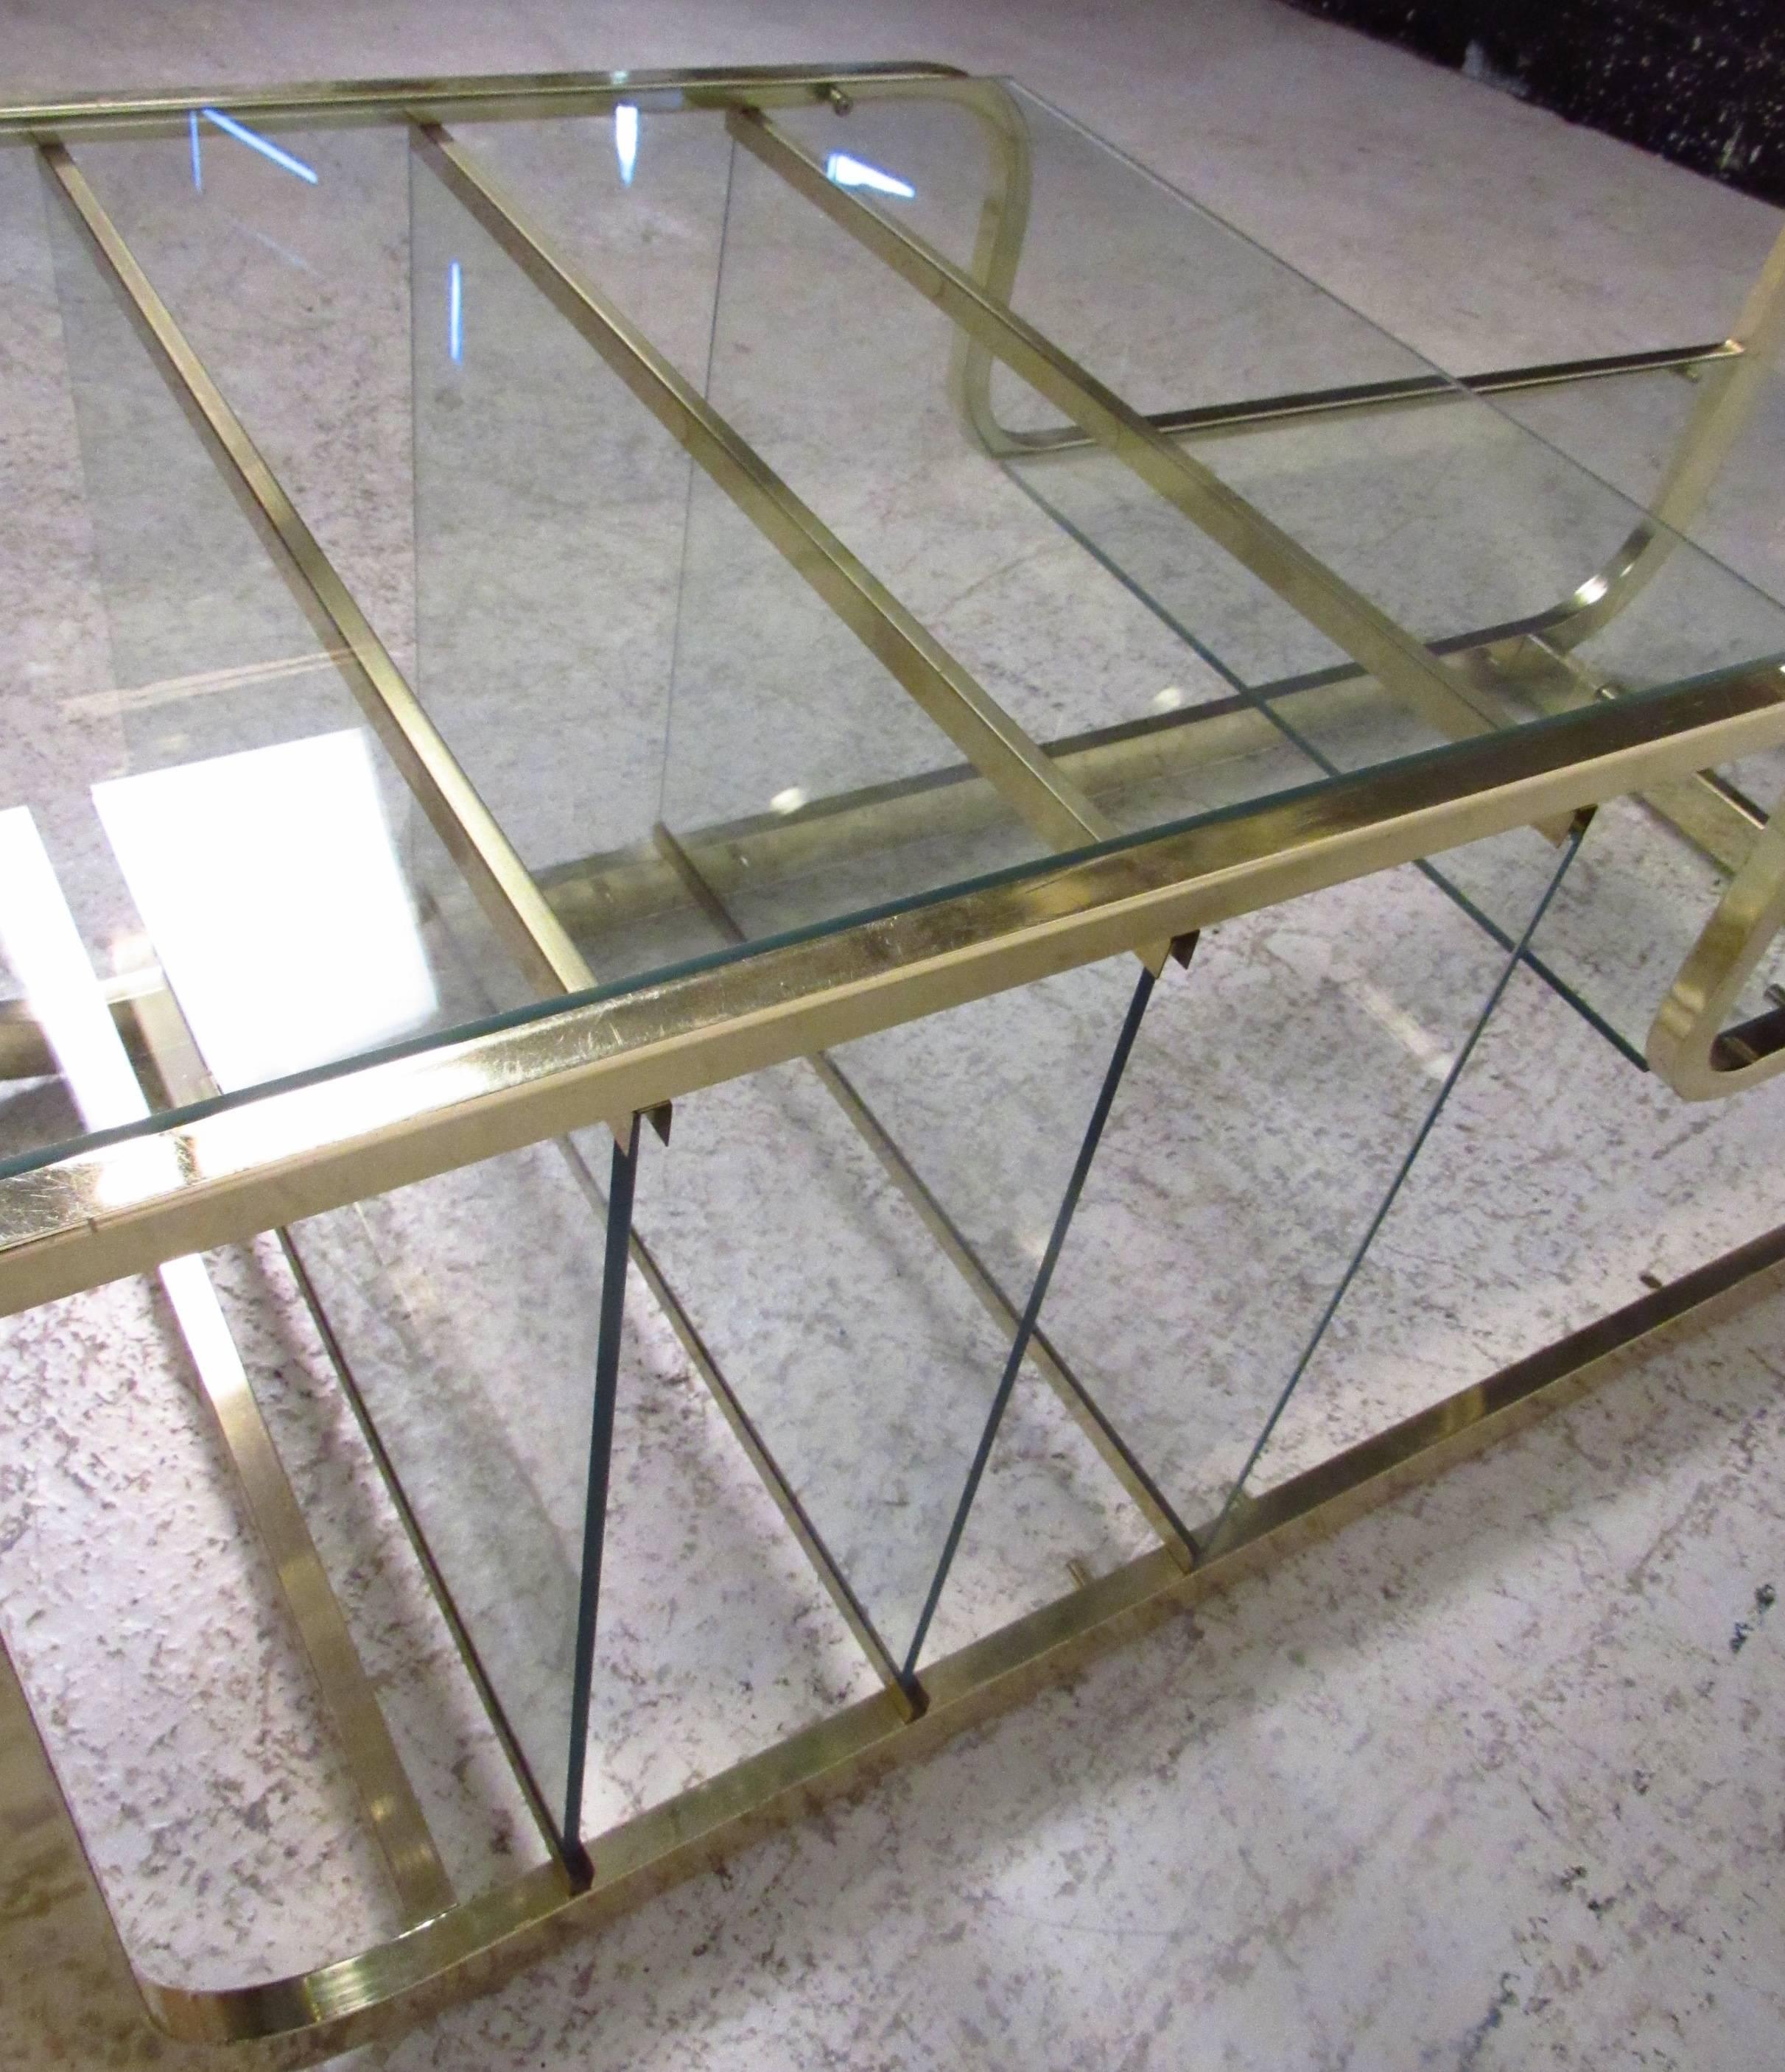 brass and glass etagere